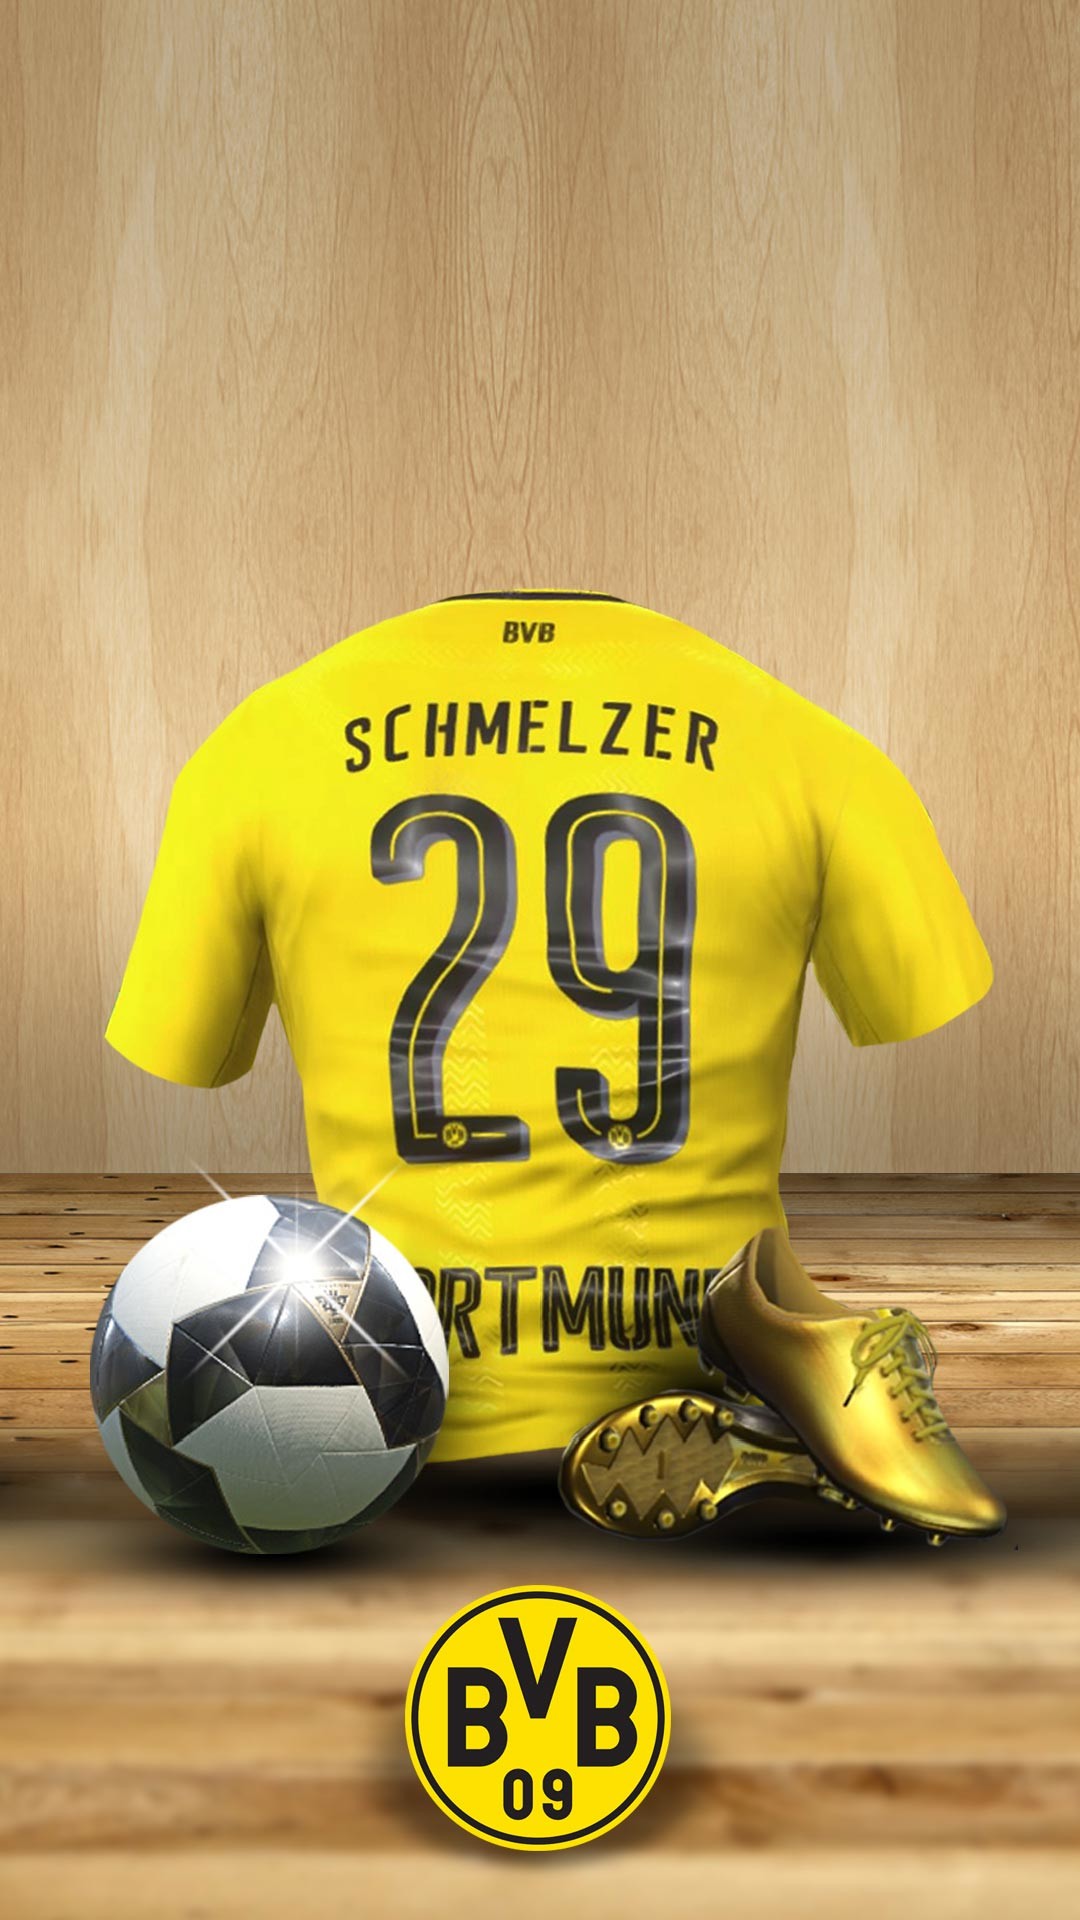 1080x1920 Schmelzer Pes 17 android, iphone wallpaper, mobile background